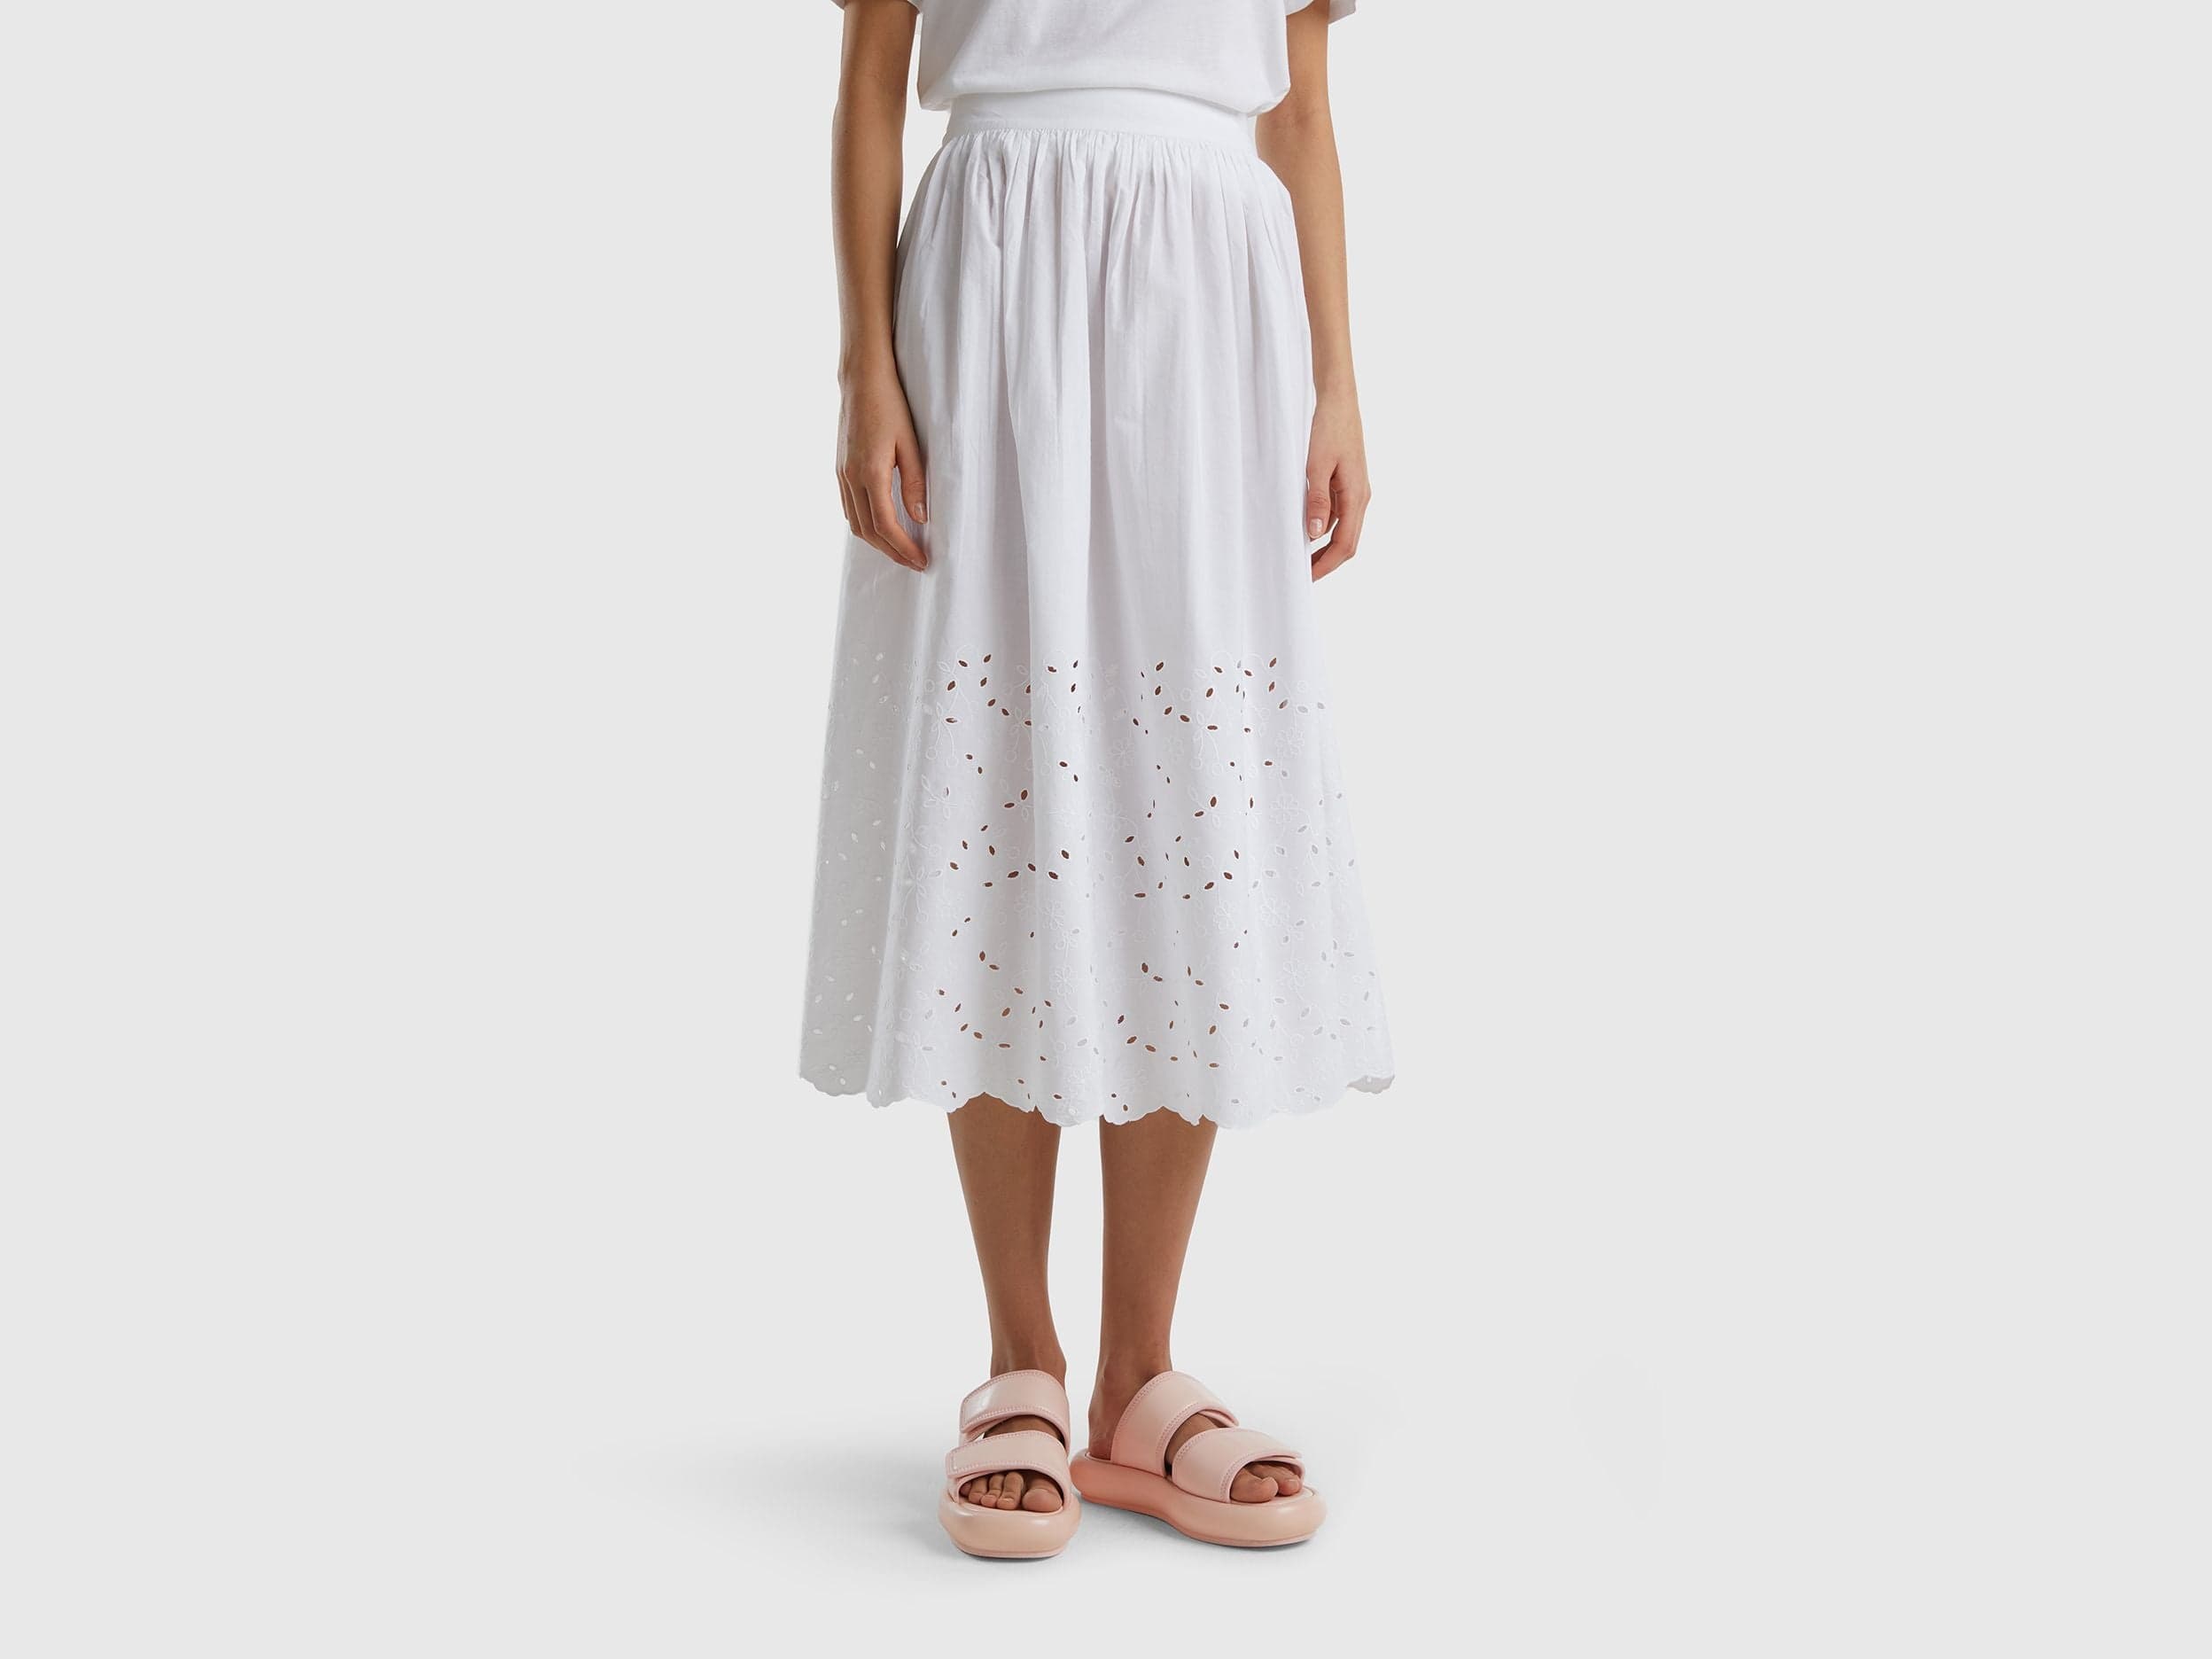 Midi skirt with broderie anglaise embroidery